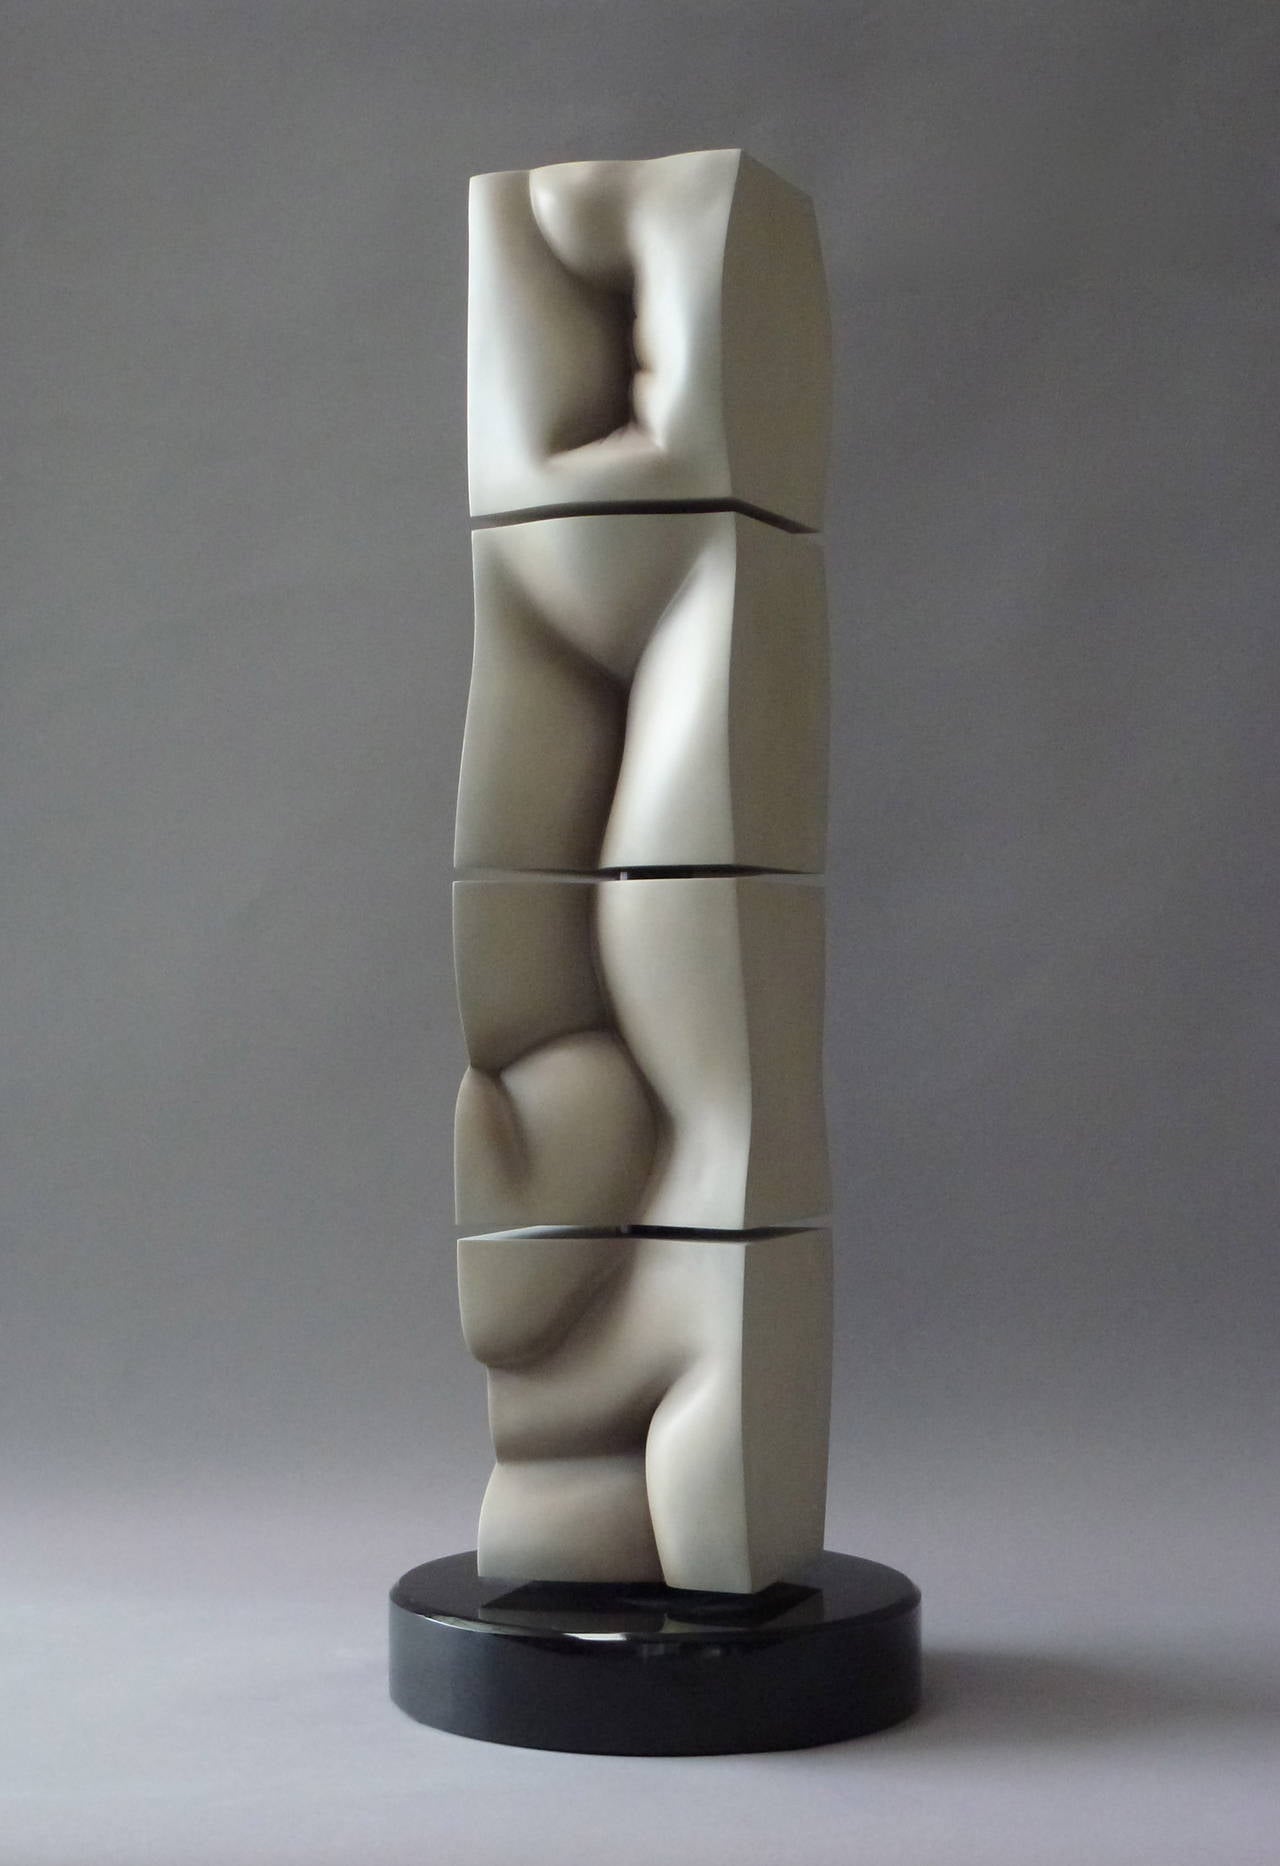 This freestanding work belongs to Ragir's abstract body of work which explores figure as landscape. The painted cast resin column is composed of four independent cubes anchored by a central pole and marble base. The cubes can be aligned or rotated